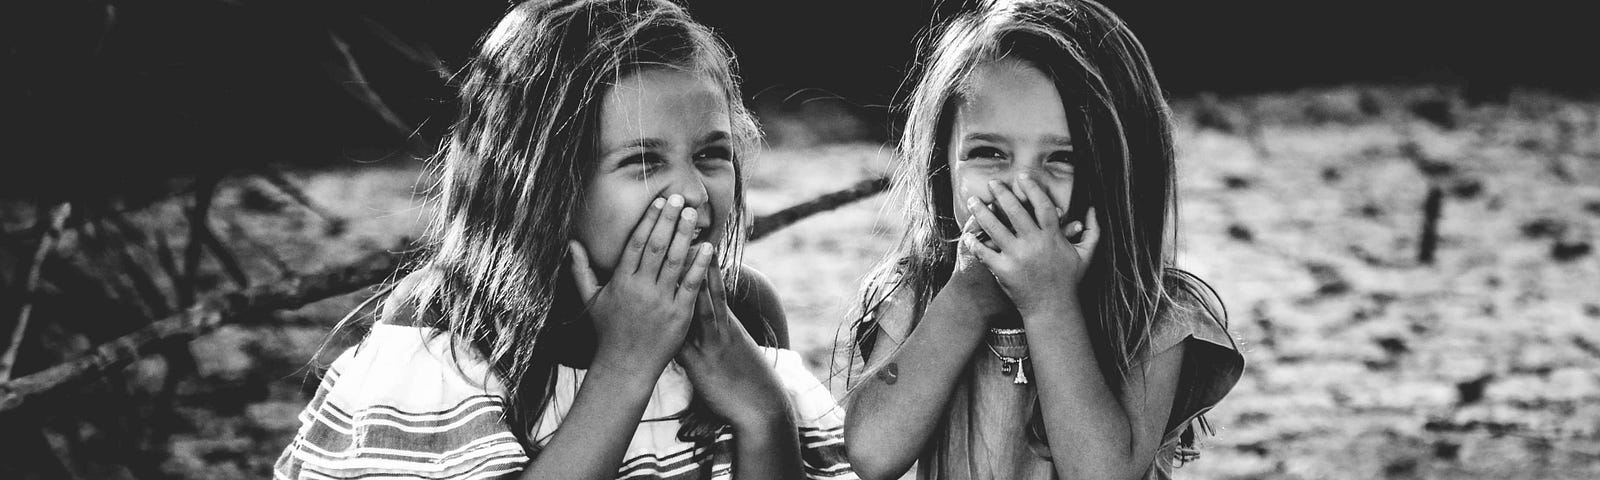 Two little girls cupping their mouths while giggling.